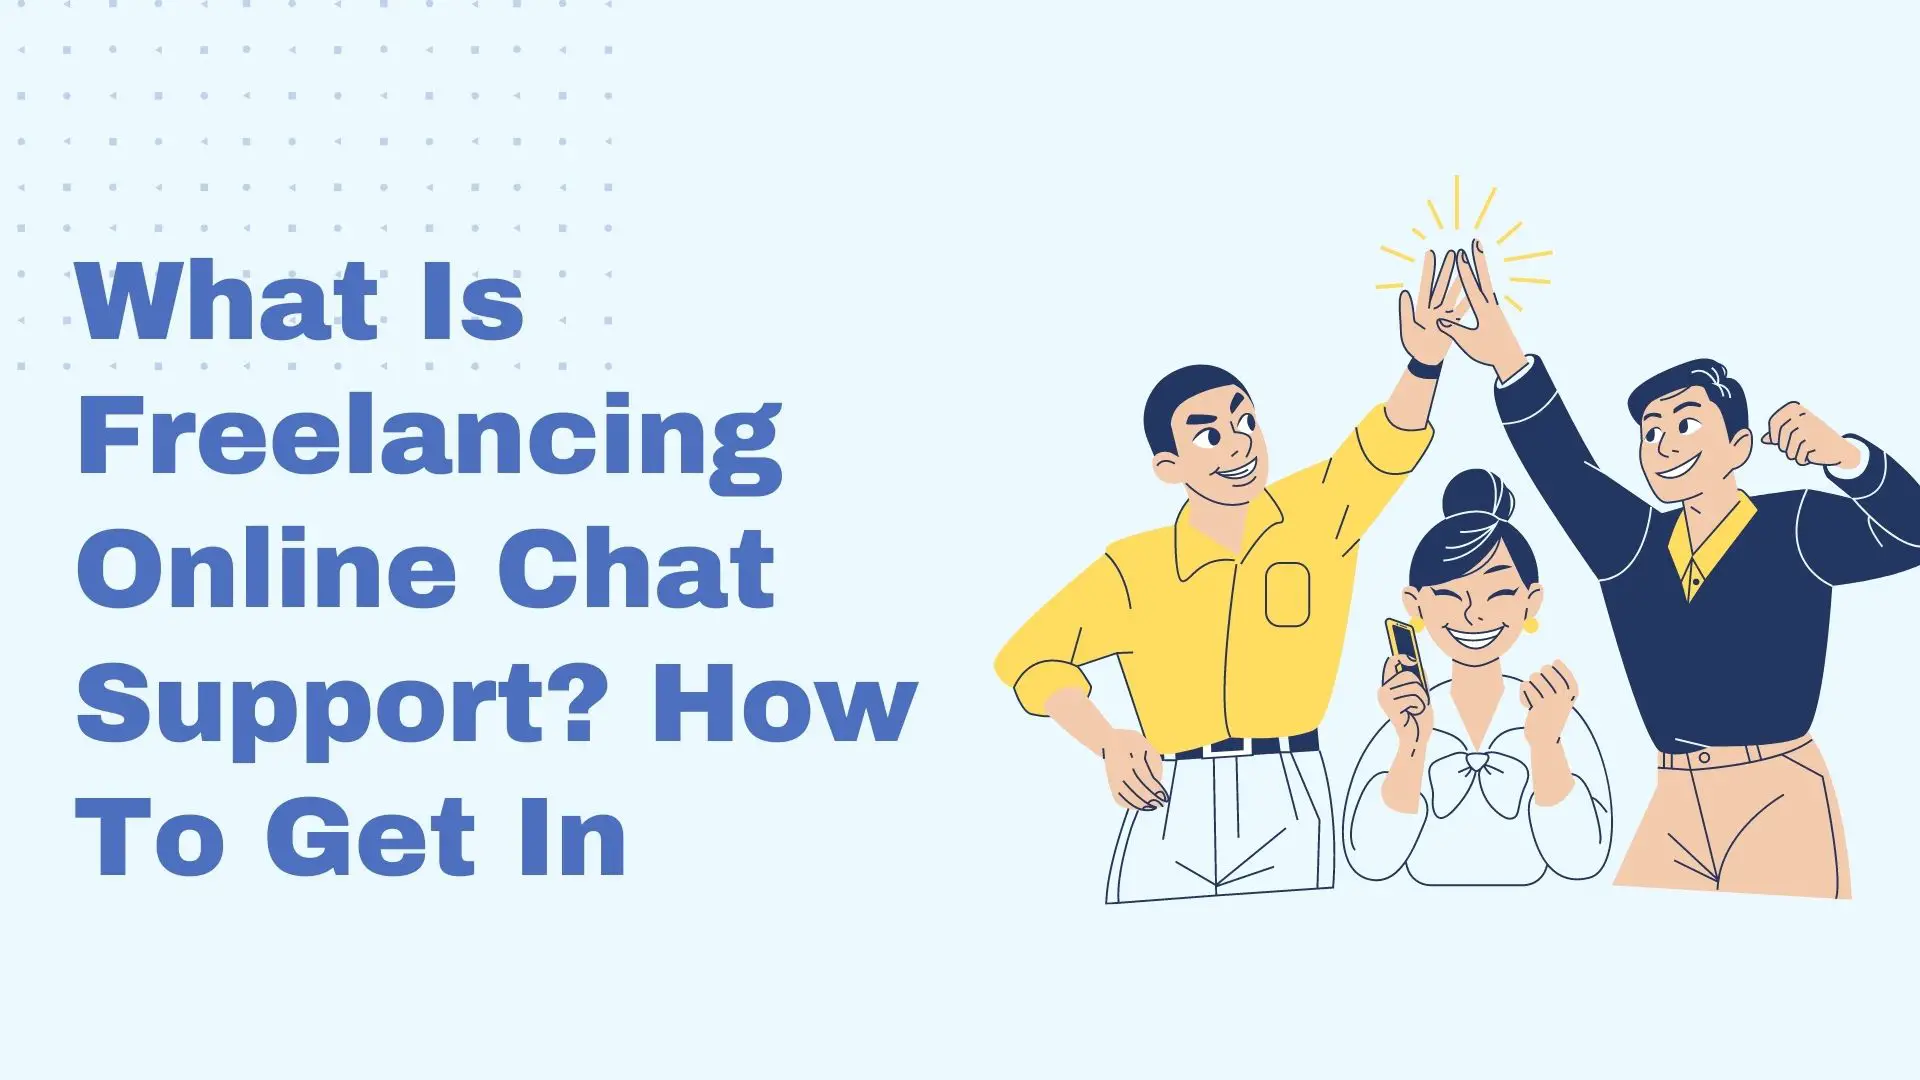 What Is Freelancing Online Chat Support? How To Get In